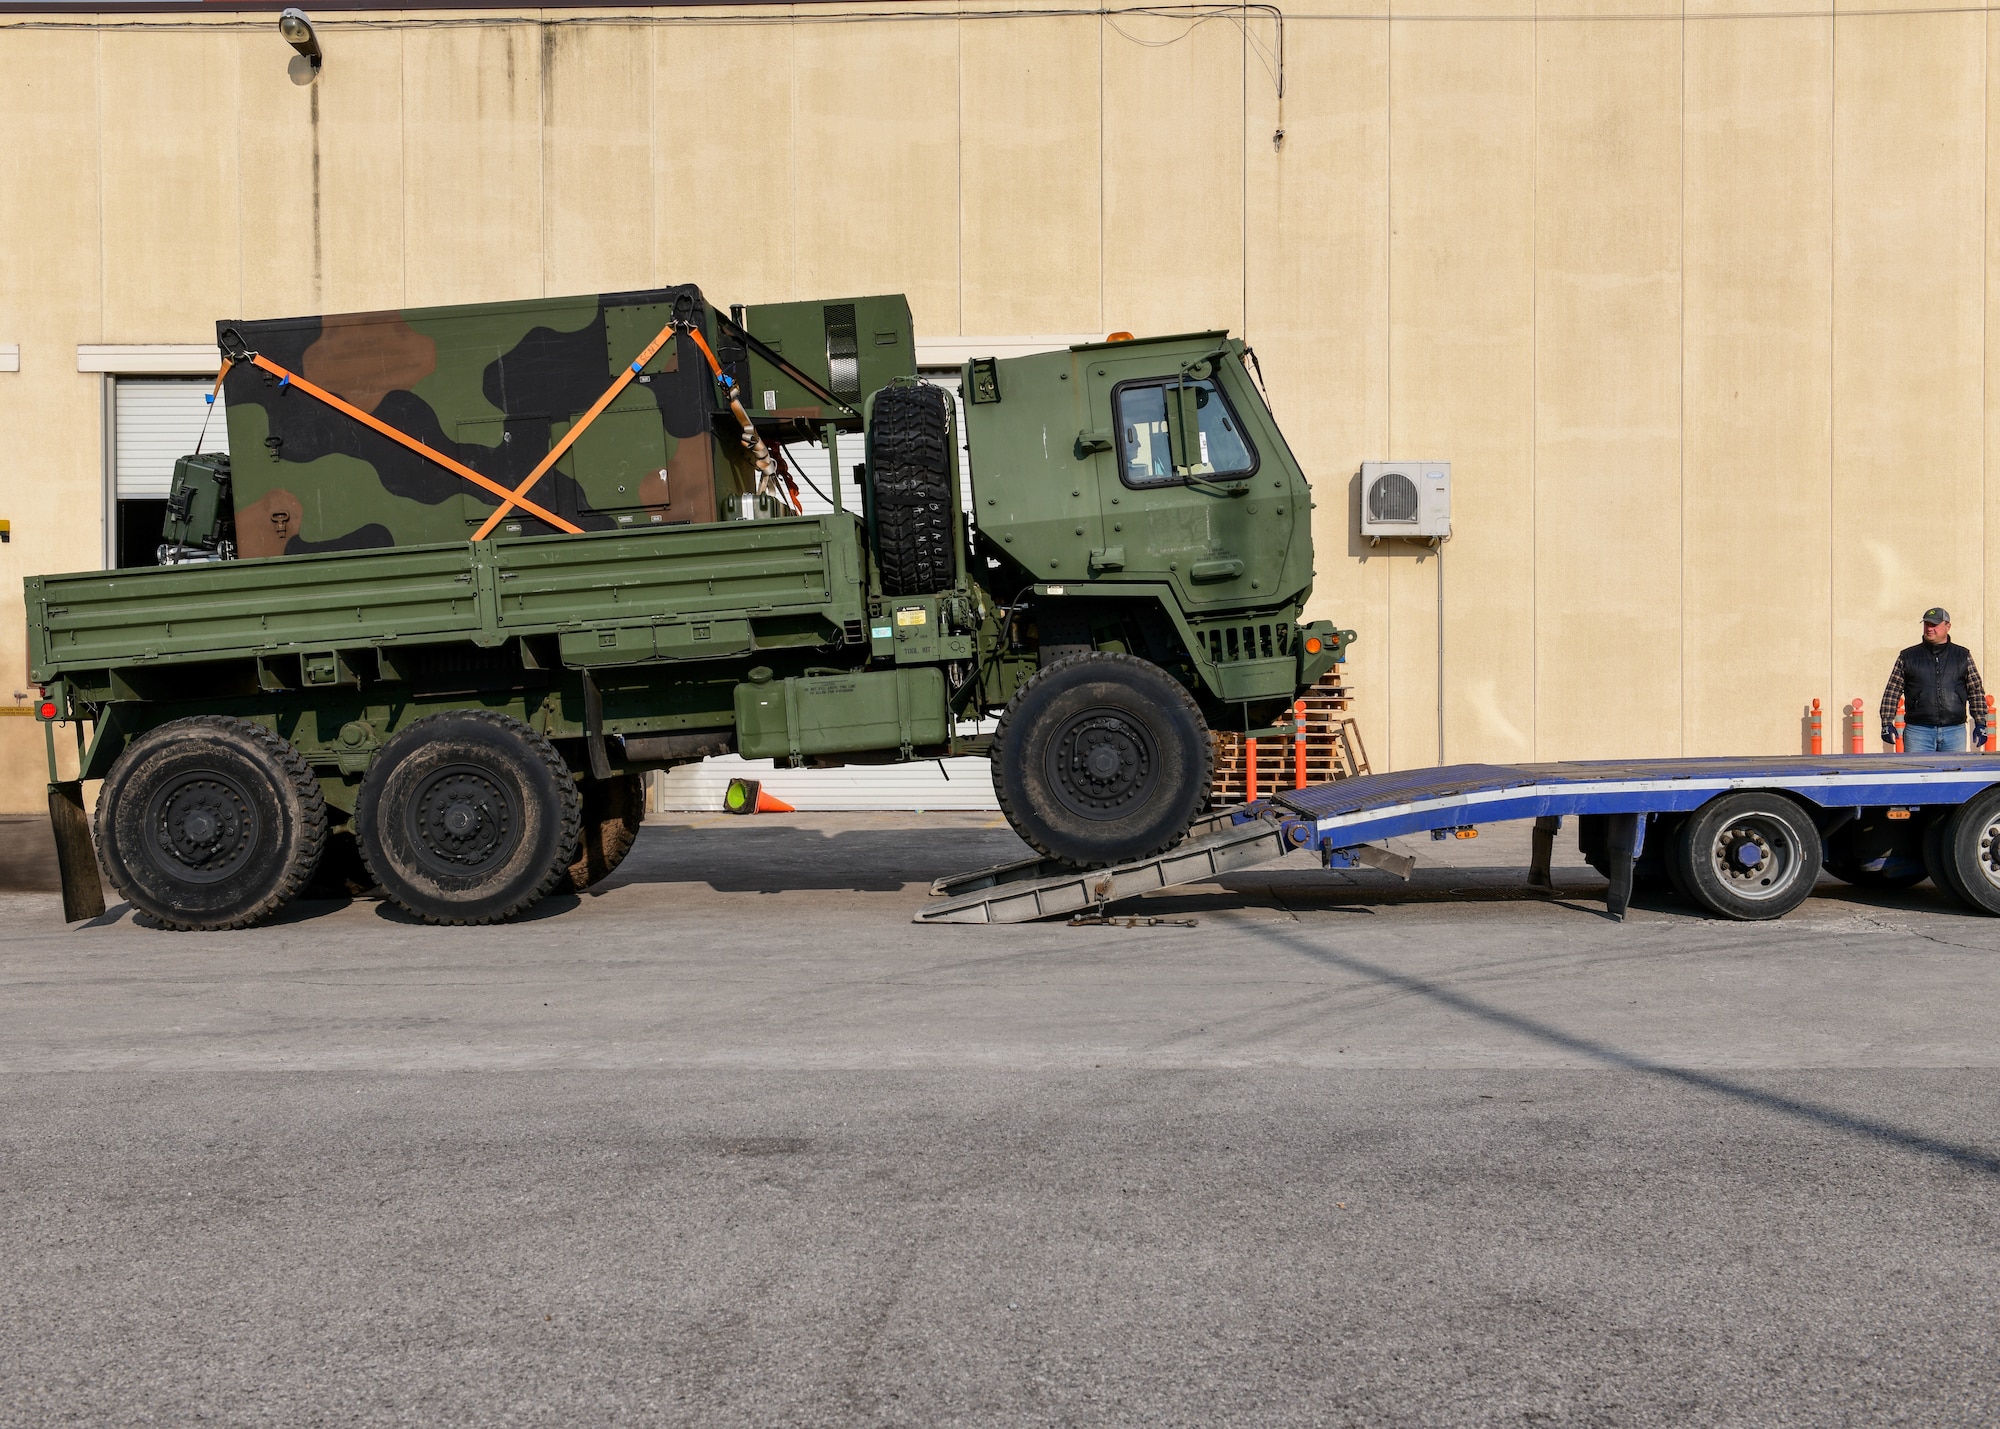 A five-ton truck is loaded onto a trailer at Aviano Air Base, Italy, March 4, 2022. The 31st Logistics Readiness Squadron Traffic Management section sent cargo such as trucks, medical supplies, computer equipment, mobility bags and more to deployed members in Eastern Europe. (U.S. Air Force photo by Senior Airman Brooke Moeder)